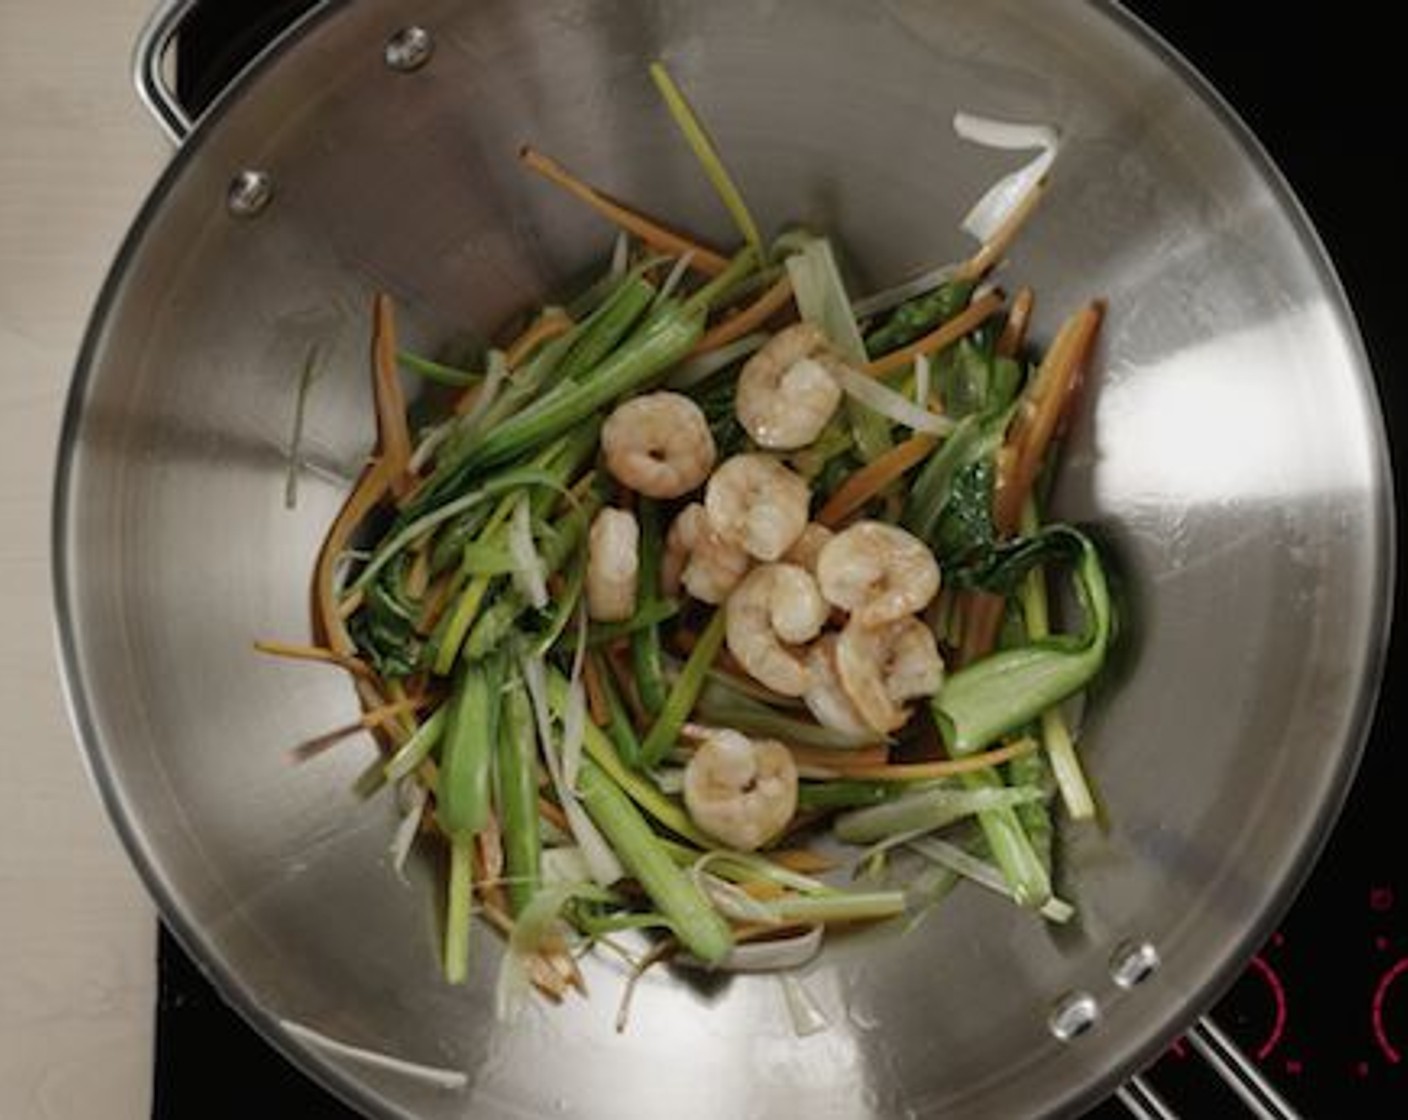 step 9 Next, place the shrimps back in the wok and stir-fry for a maximum of 30 seconds to get the outer layers golden brown and crispy. Season with Salt (to taste).